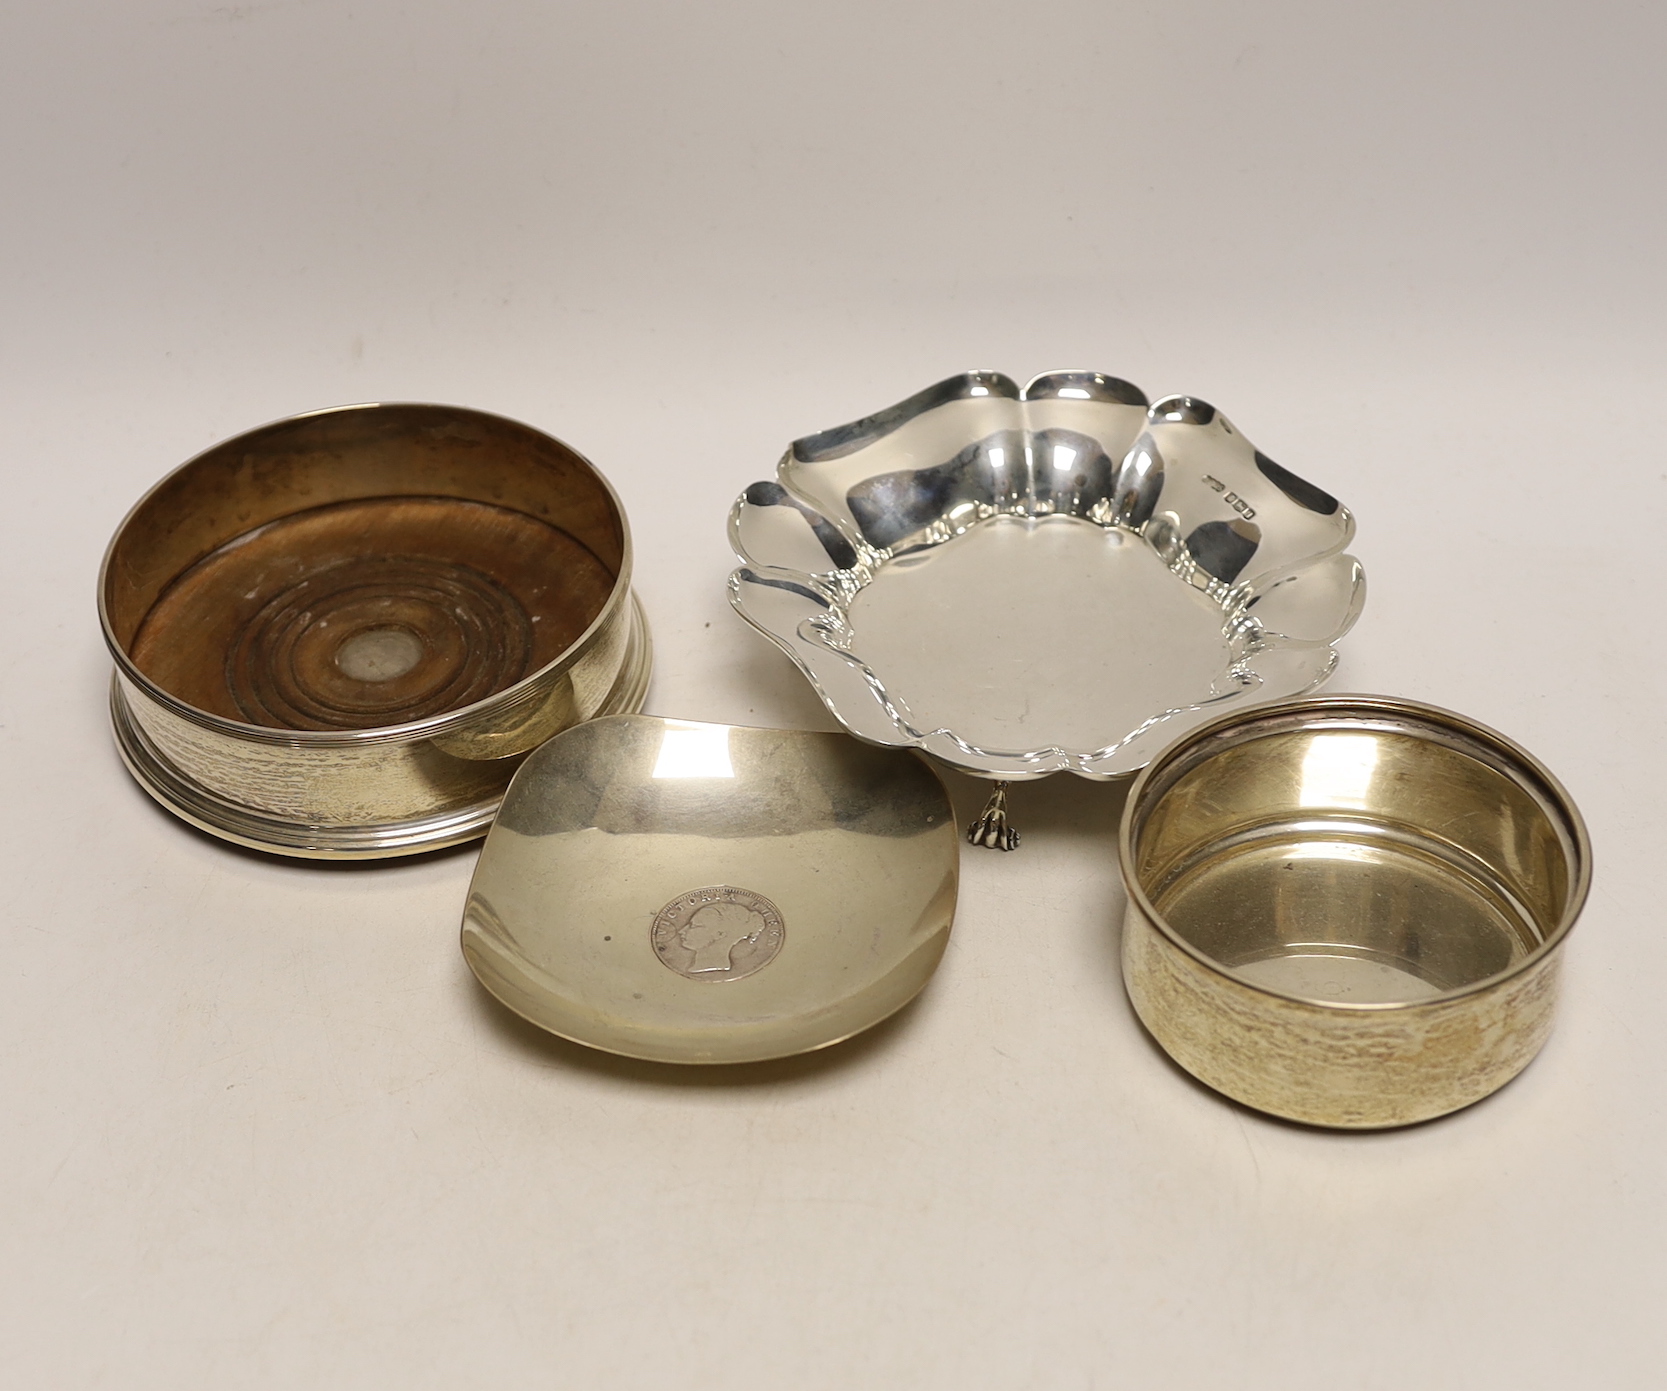 A small George V silver bowl, Sheffield, 1934, a silver bottle coaster, a small Indian white metal dish with inset rupee coin and a further small silver christening bowl.